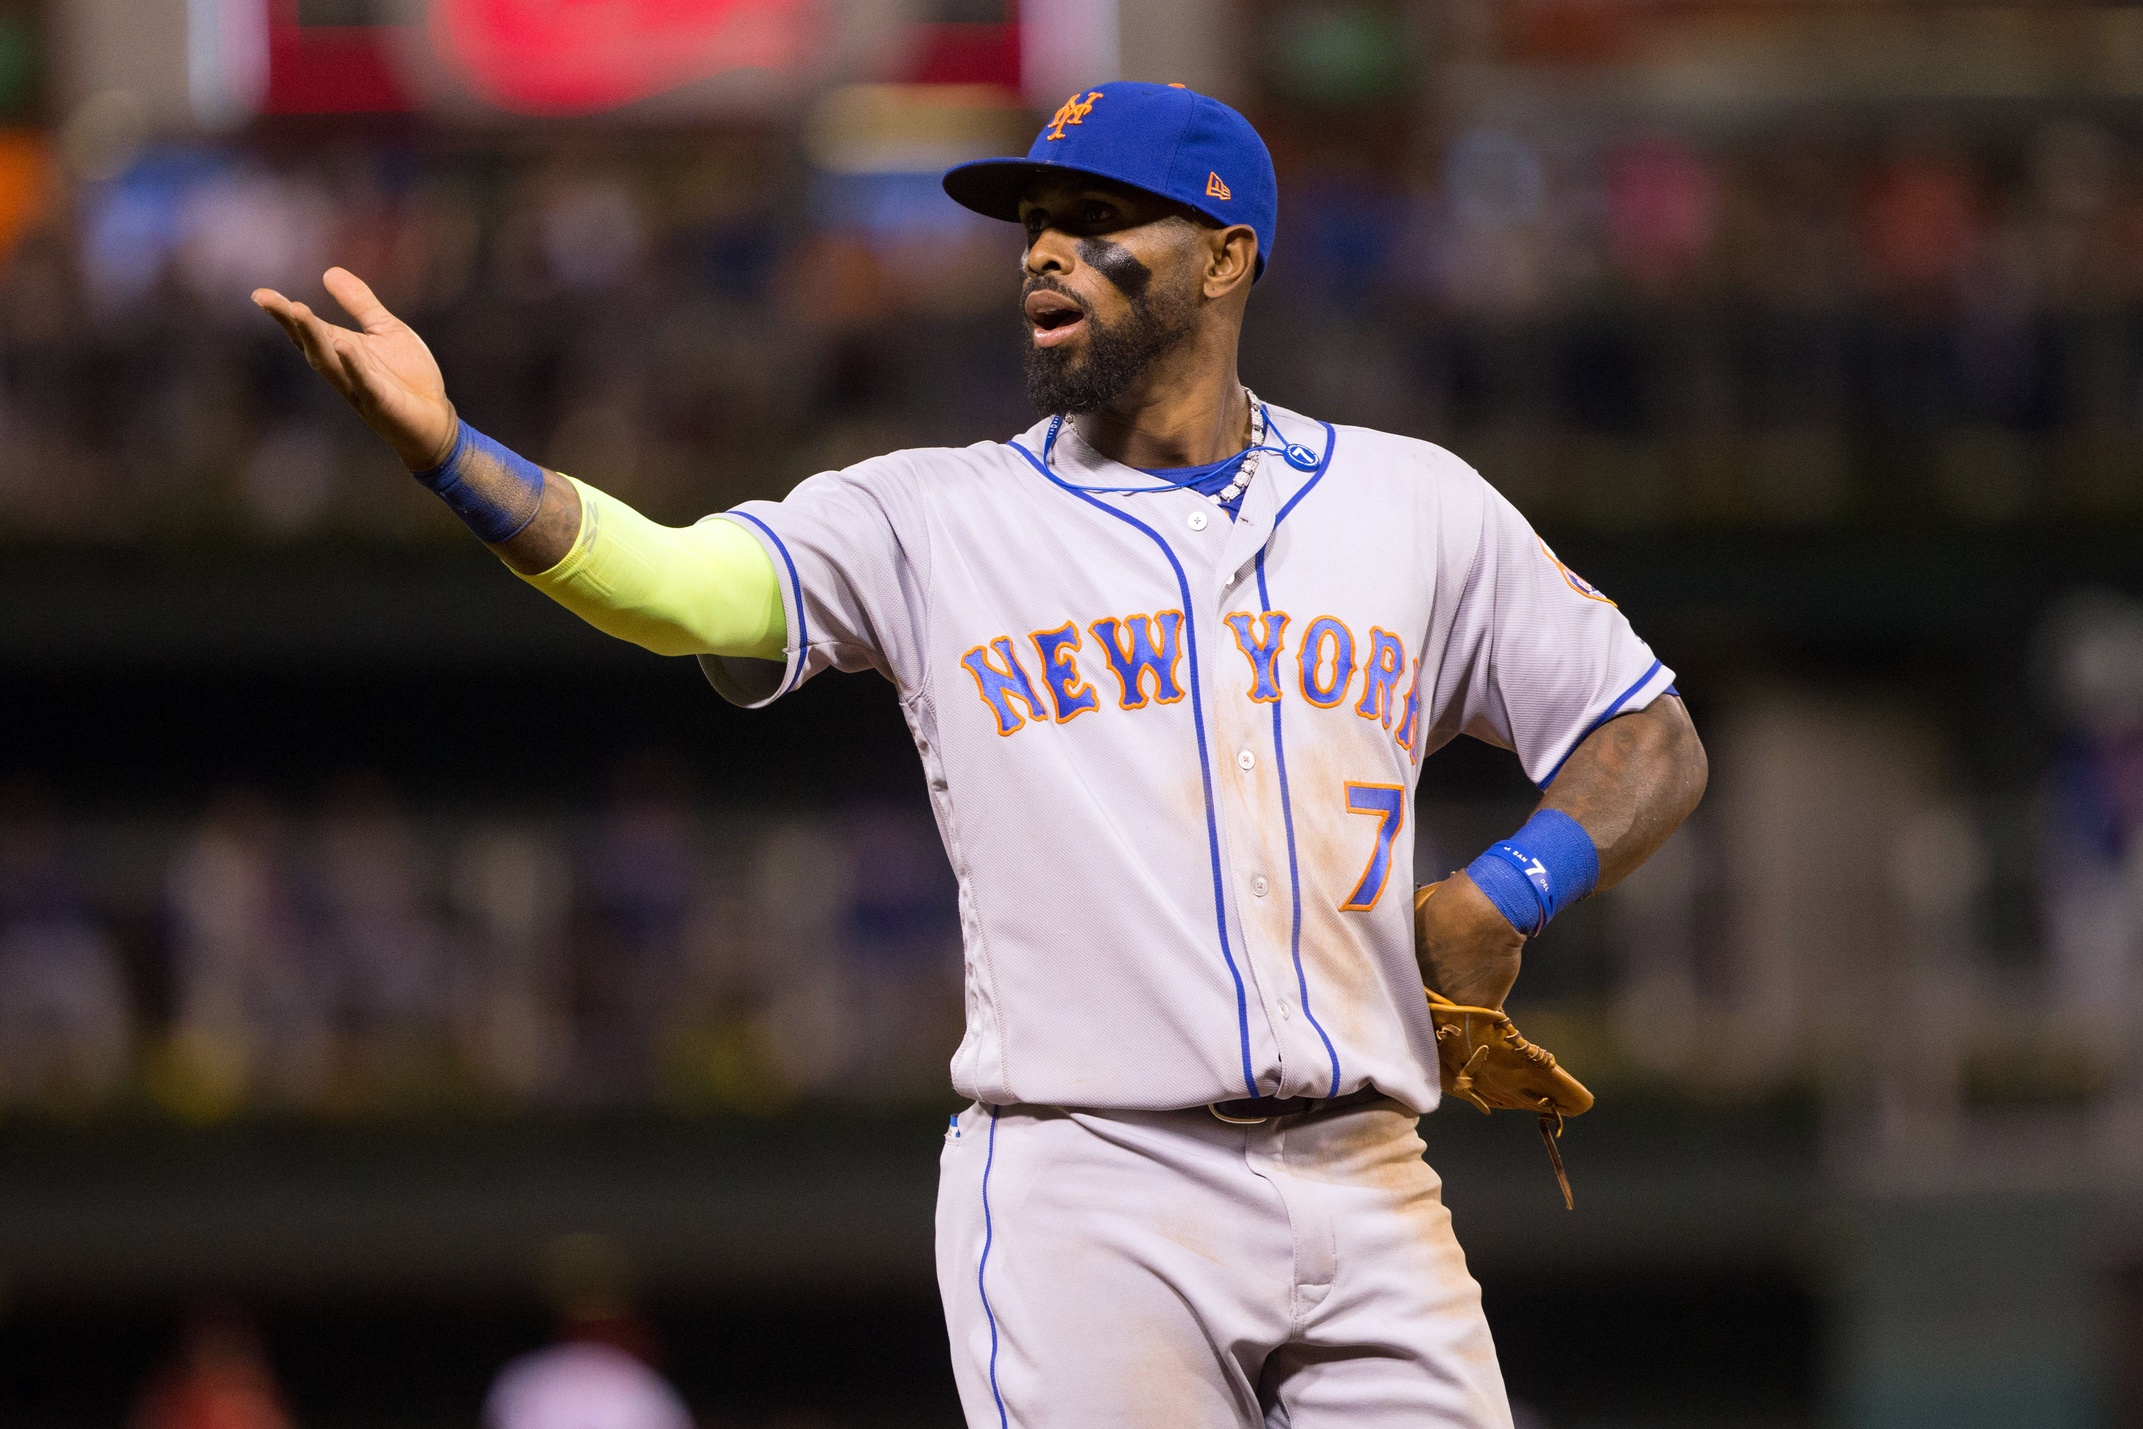 Caption: Apr 11, 2017; Philadelphia, PA, USA; New York Mets third baseman Jose Reyes (7) reacts with fans during a game against the Philadelphia Phillies at Citizens Bank Park. The New York Mets won 14-4. Mandatory Credit: Bill Streicher-USA TODAY Sports